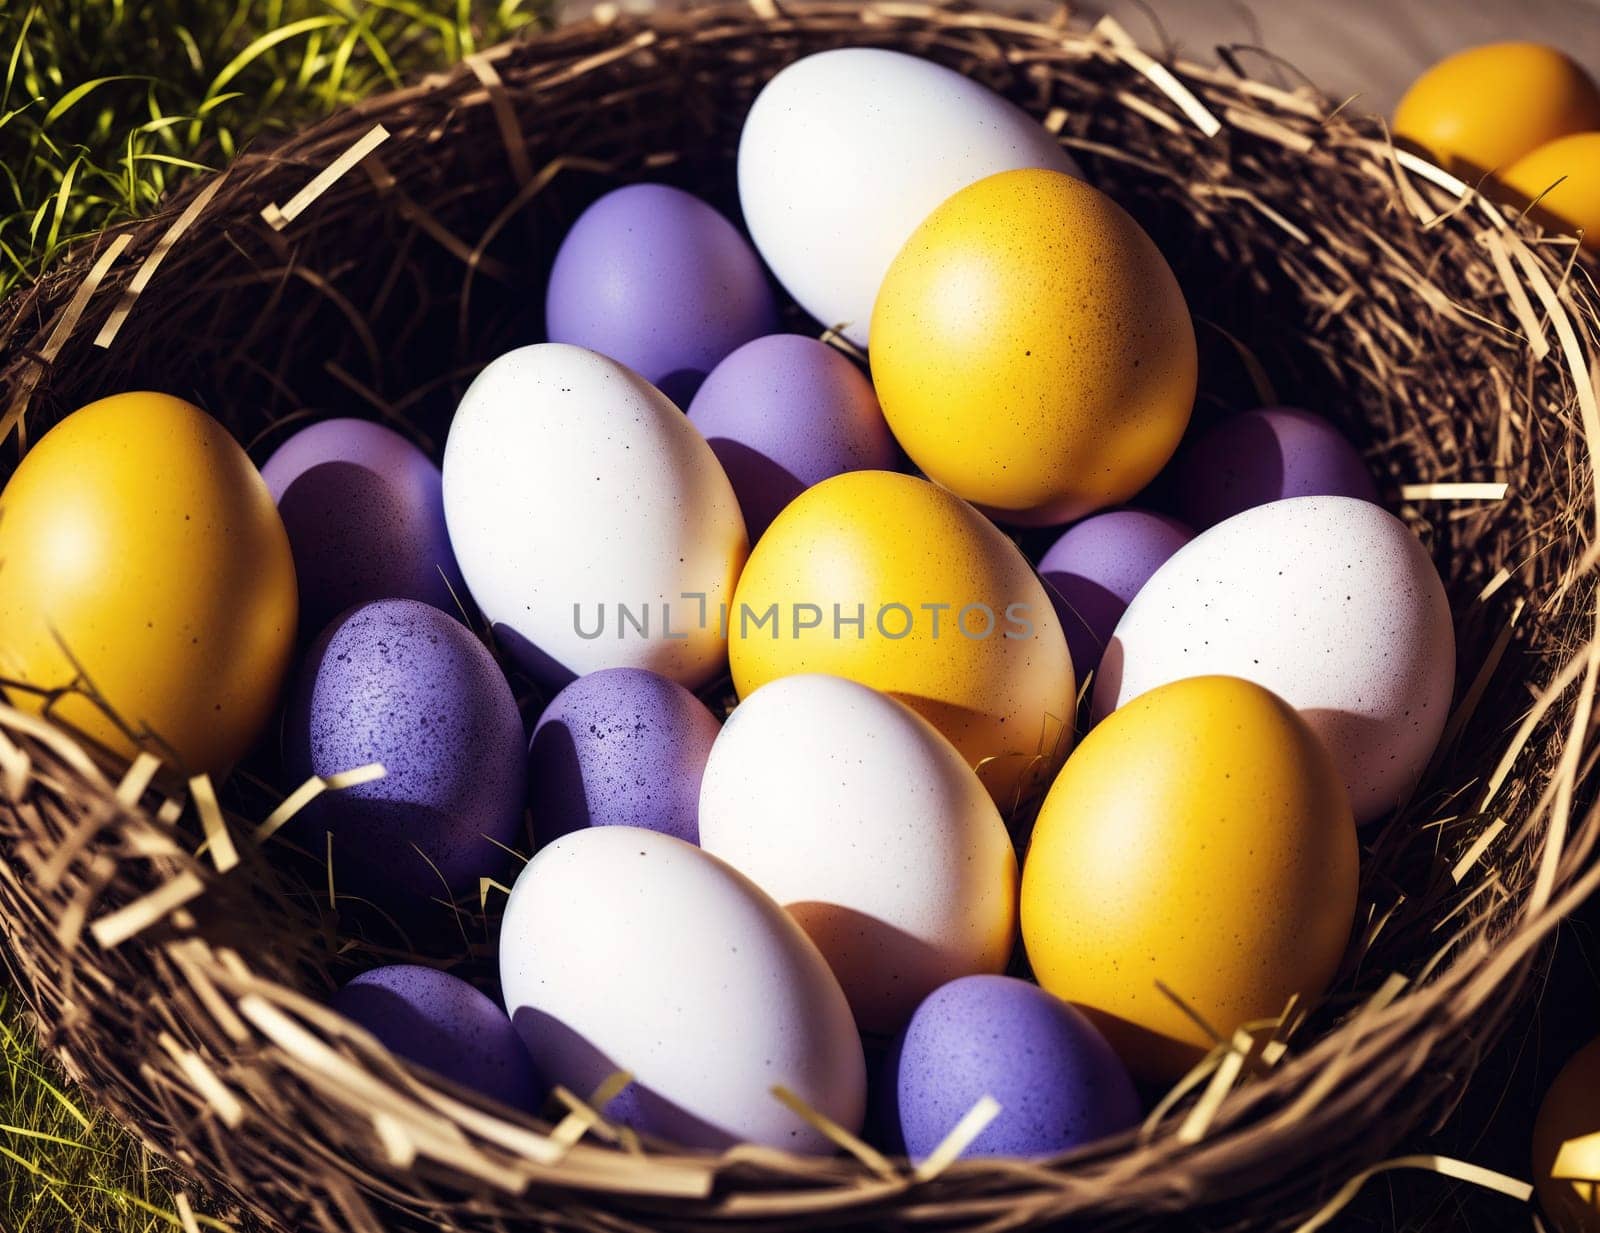 A basket full of colorful eggs by creart